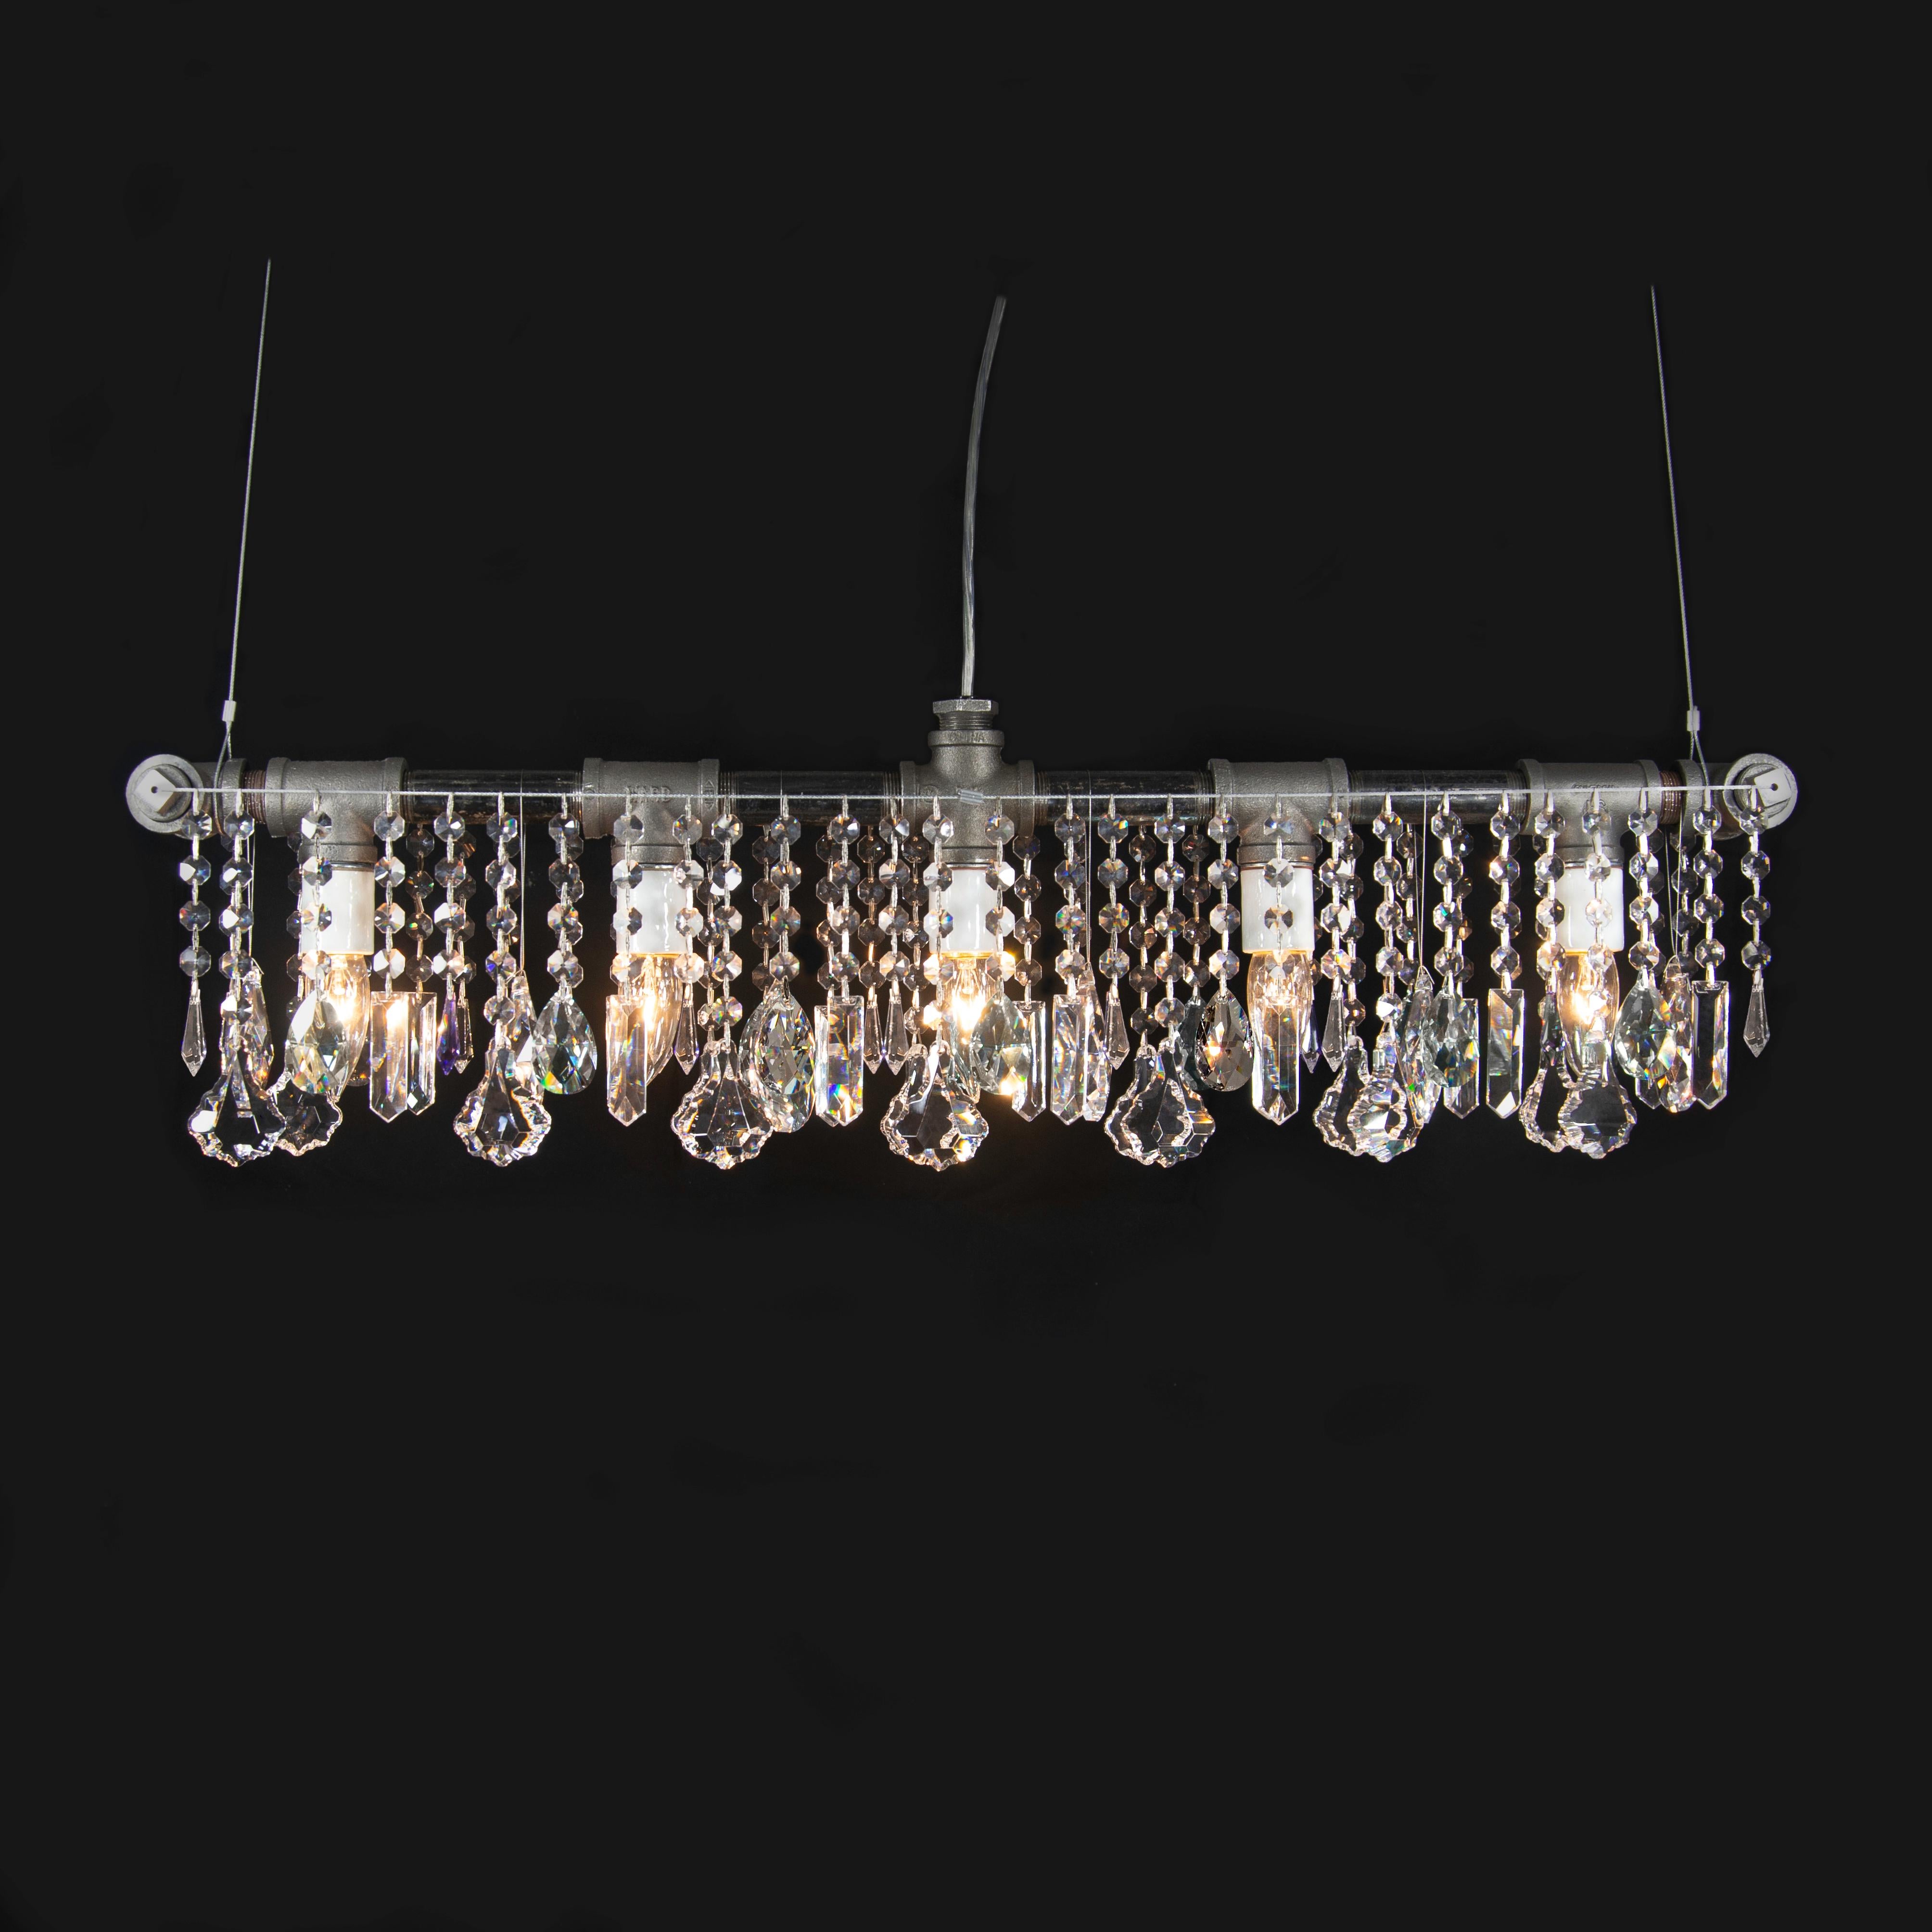 A Classic. This Industrial bar chandelier linear suspension features five porcelain sockets in a straight-line across a structure made of rough industrial pipes and fittings and flanked by curtains of super-high quality crystal, hanging from taut